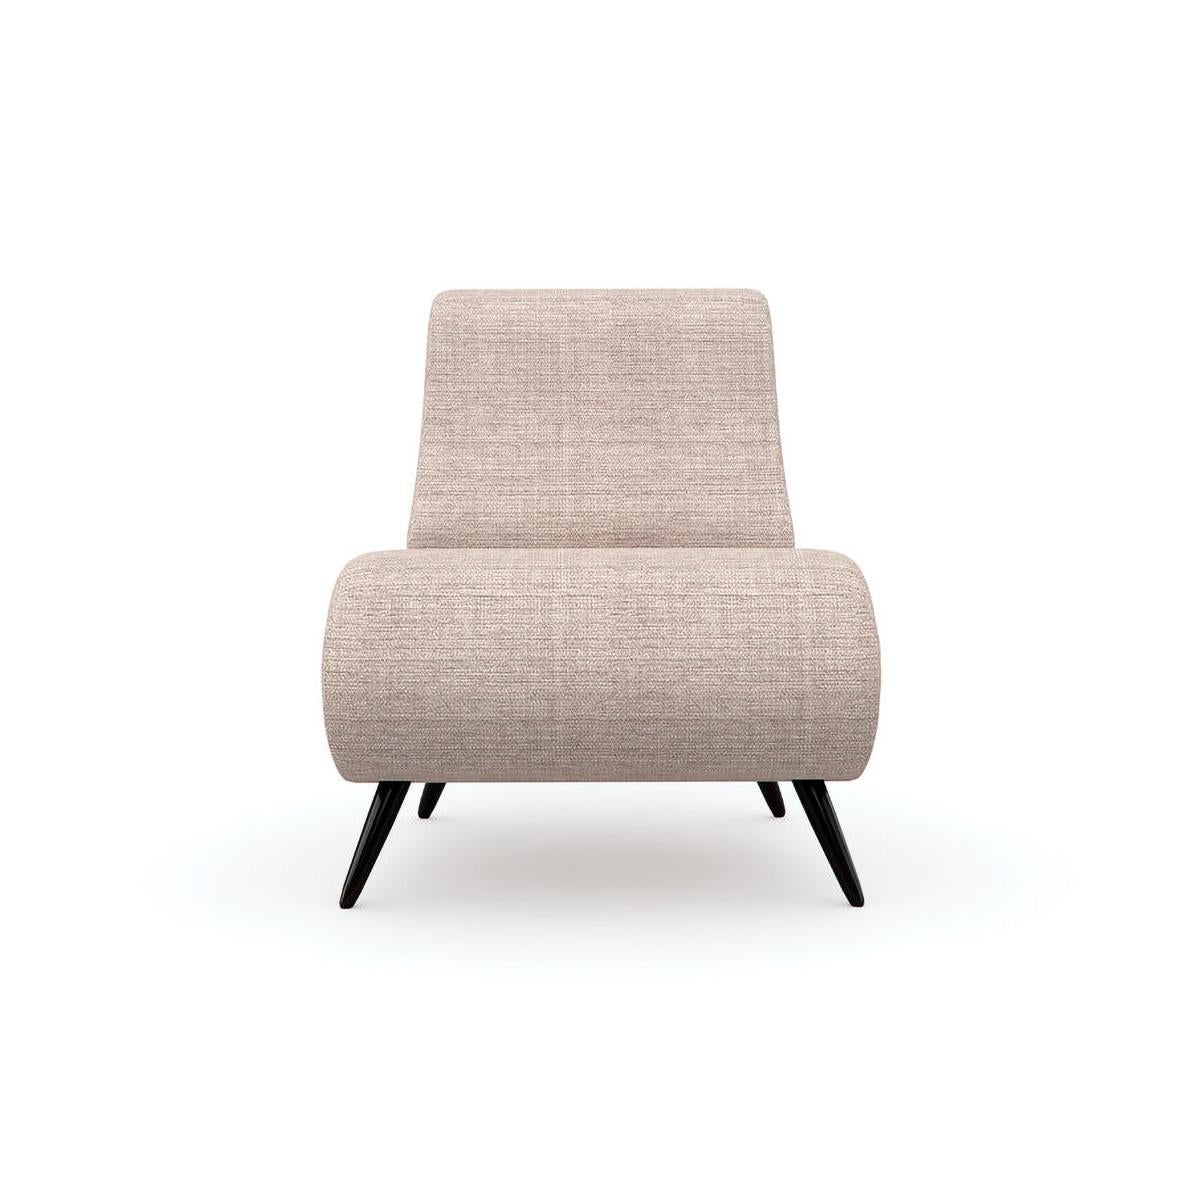 Mid-Century Modern slipper chair, bringing the beauty of nature indoors, this chair introduces a relaxed, yet refined style in a mix of organic textures and materials. Inspired by a woven bamboo chair seen while traveling in New Zealand, it features